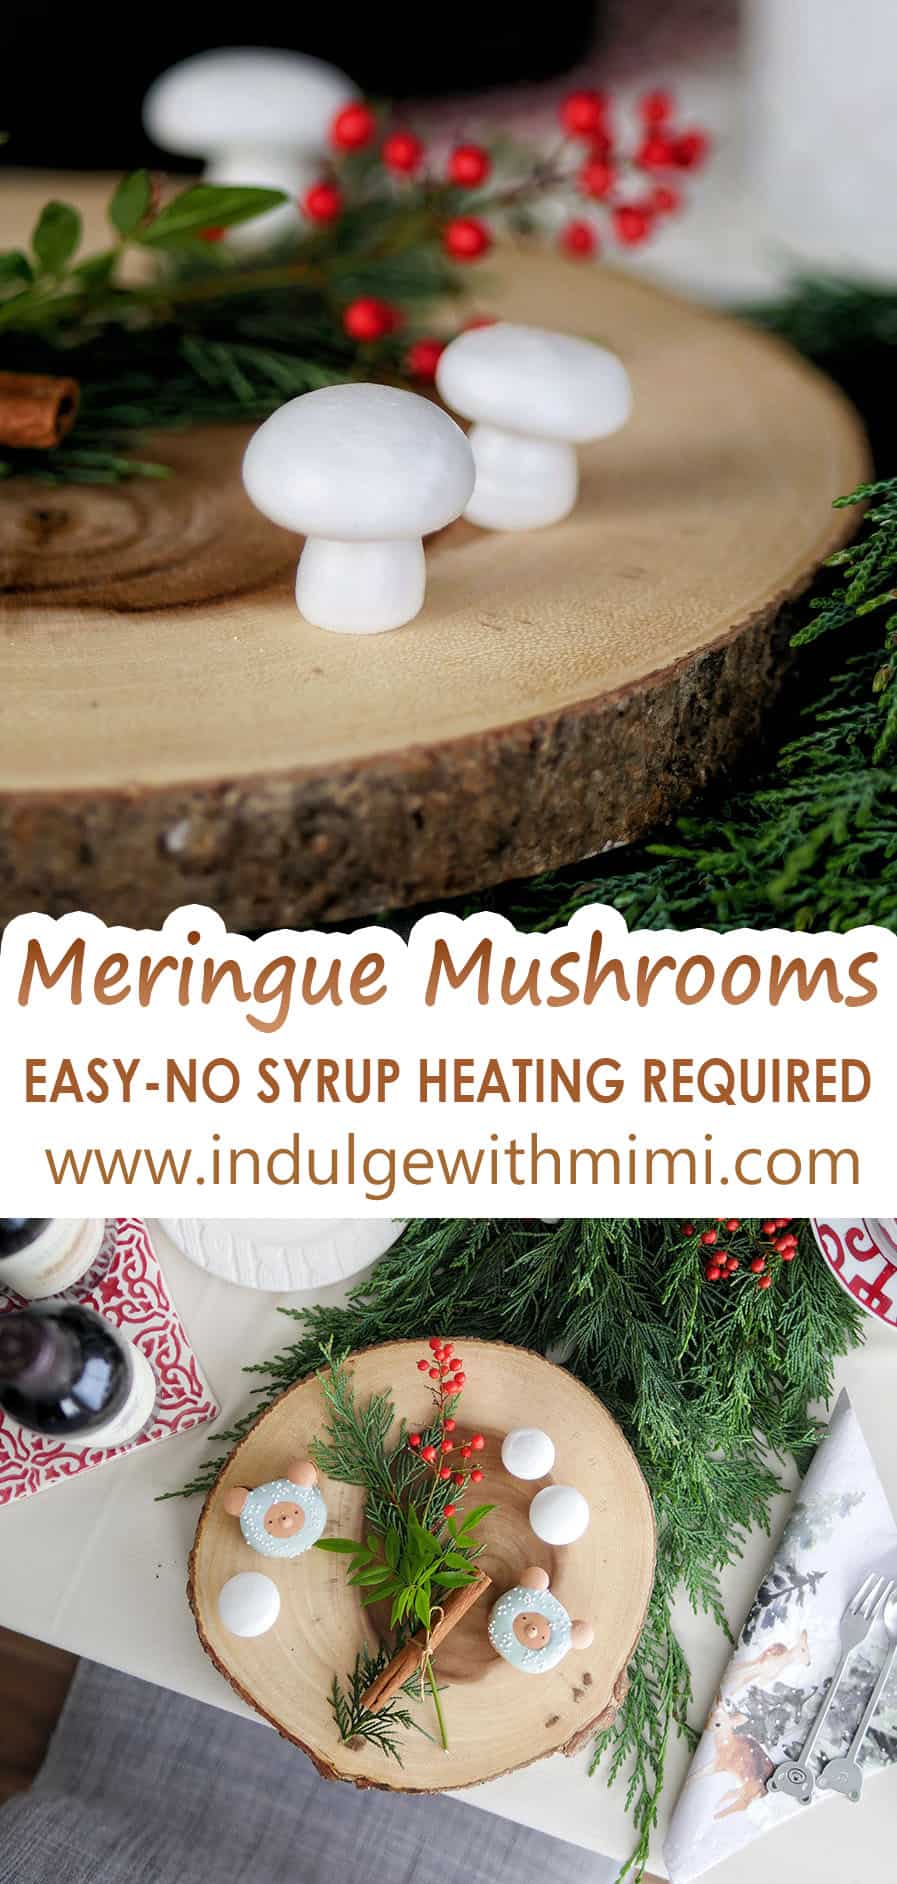 White meringue mushrooms on a wooden plate with Christmas decorations. 